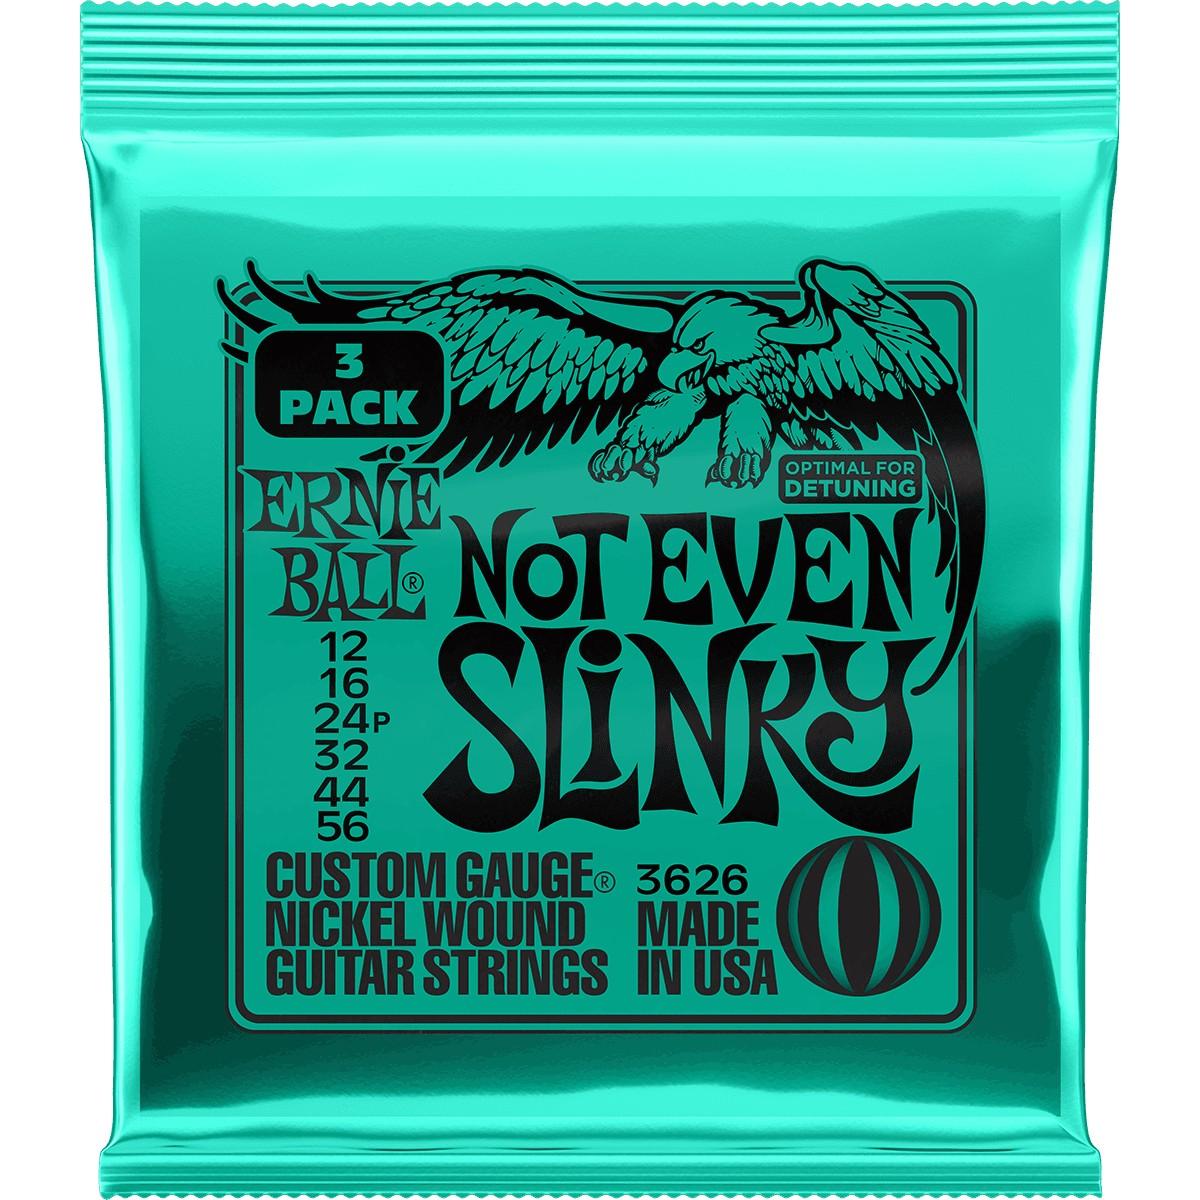 ERNIE BALL Cordes Electriques Slinky Nickel Wound Pack